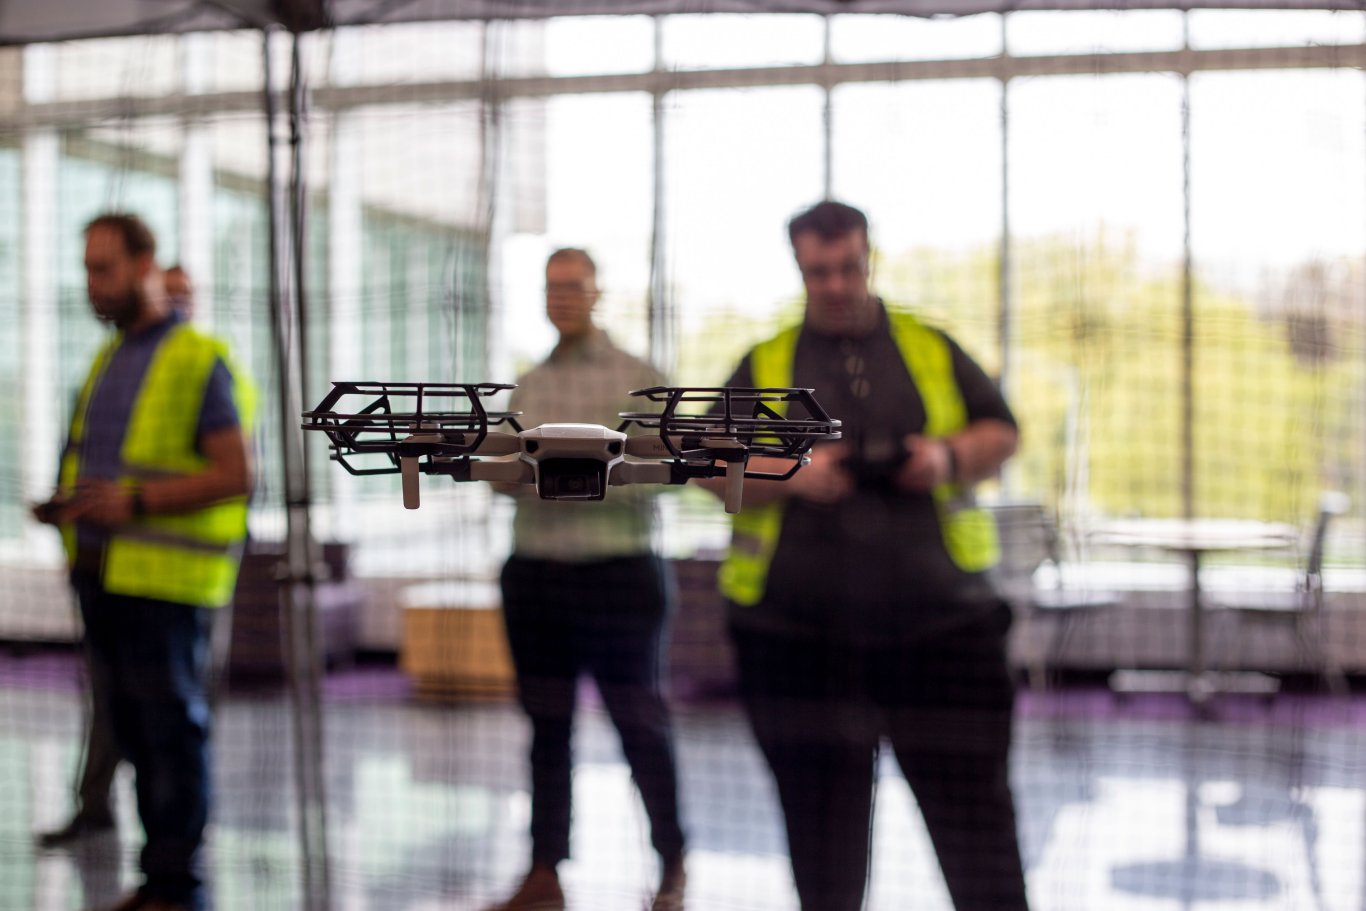 A quadcopter flies inside a netted arena, while a student in a yellow vest uses remote to control the drone at UAlbany Showcase.